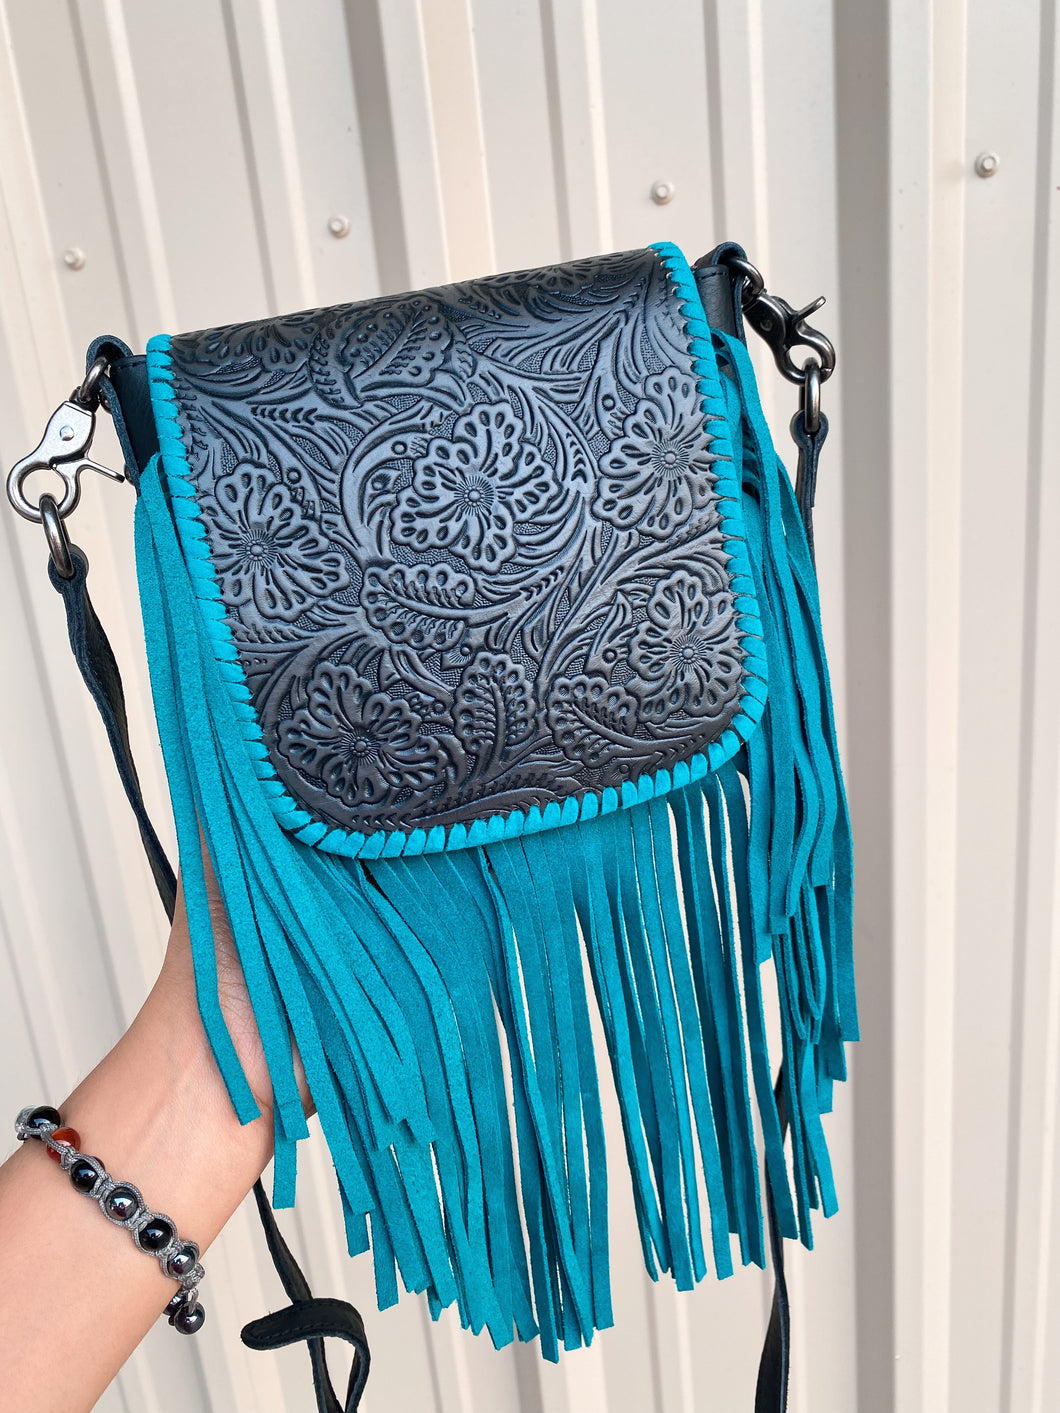 The Tooled Crossbody - Turquoise